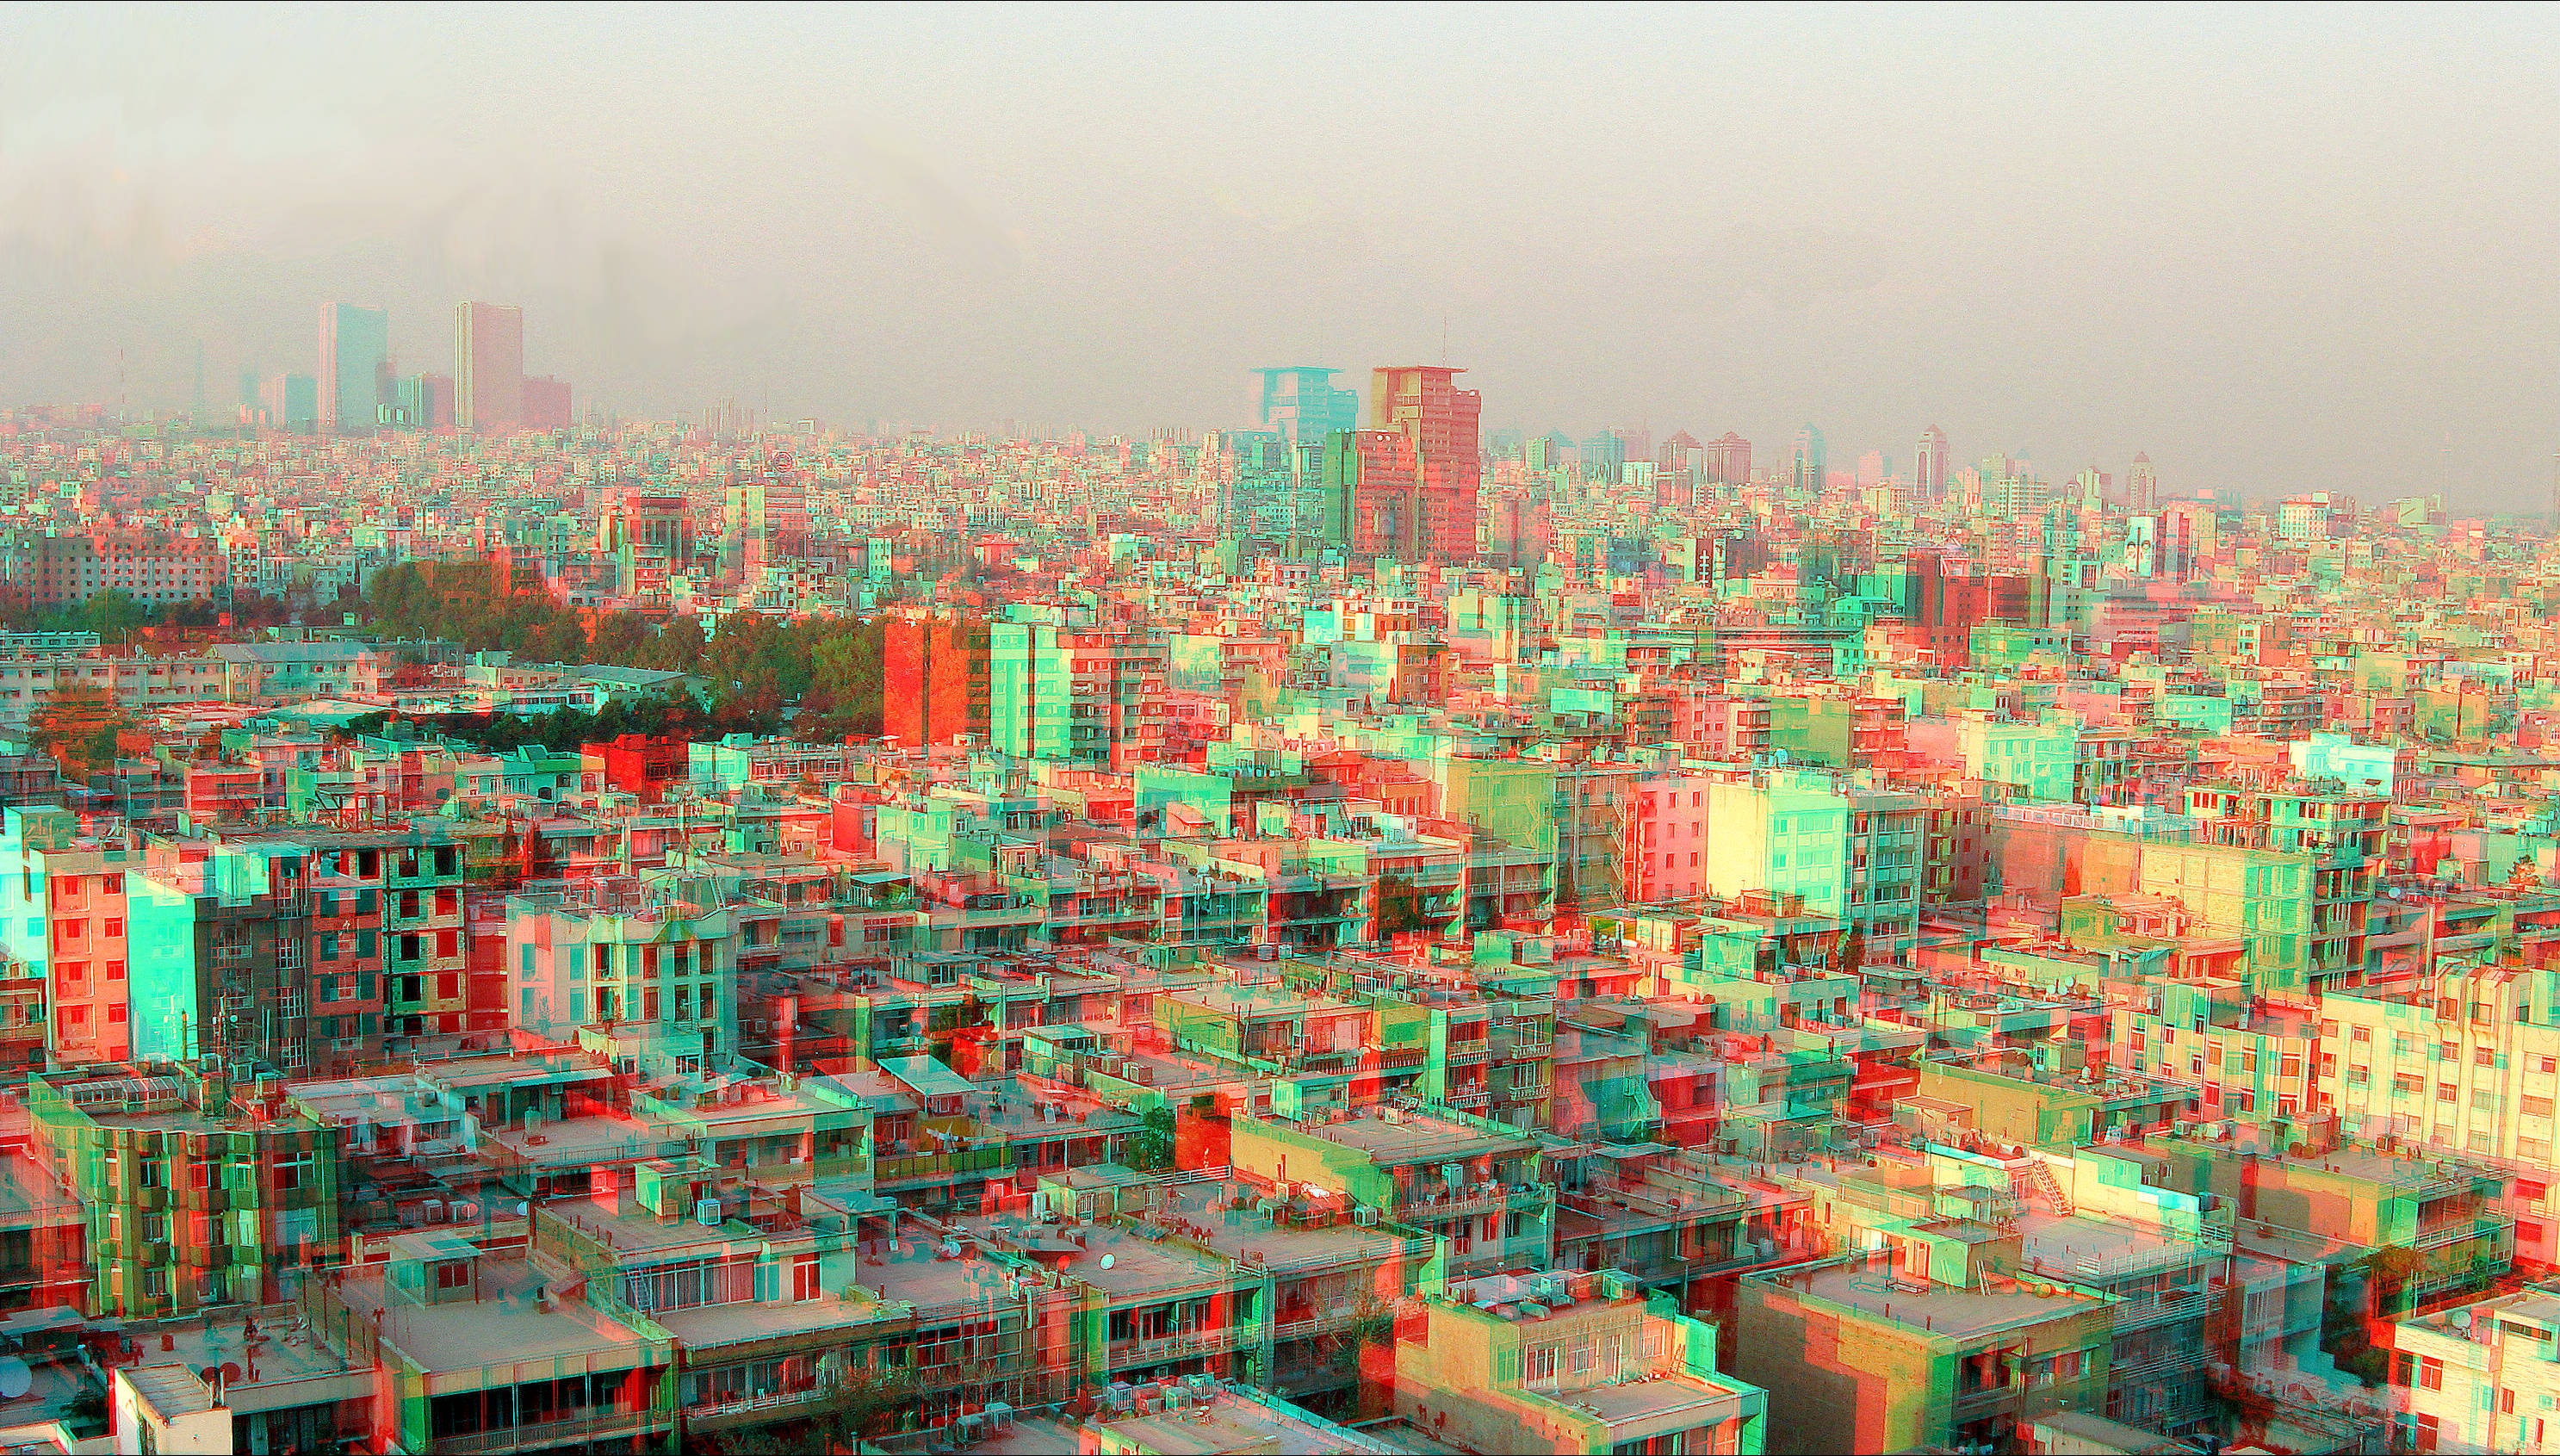 FileTehranNorth East view Anaglyph 3D You need Red Cyan glasses